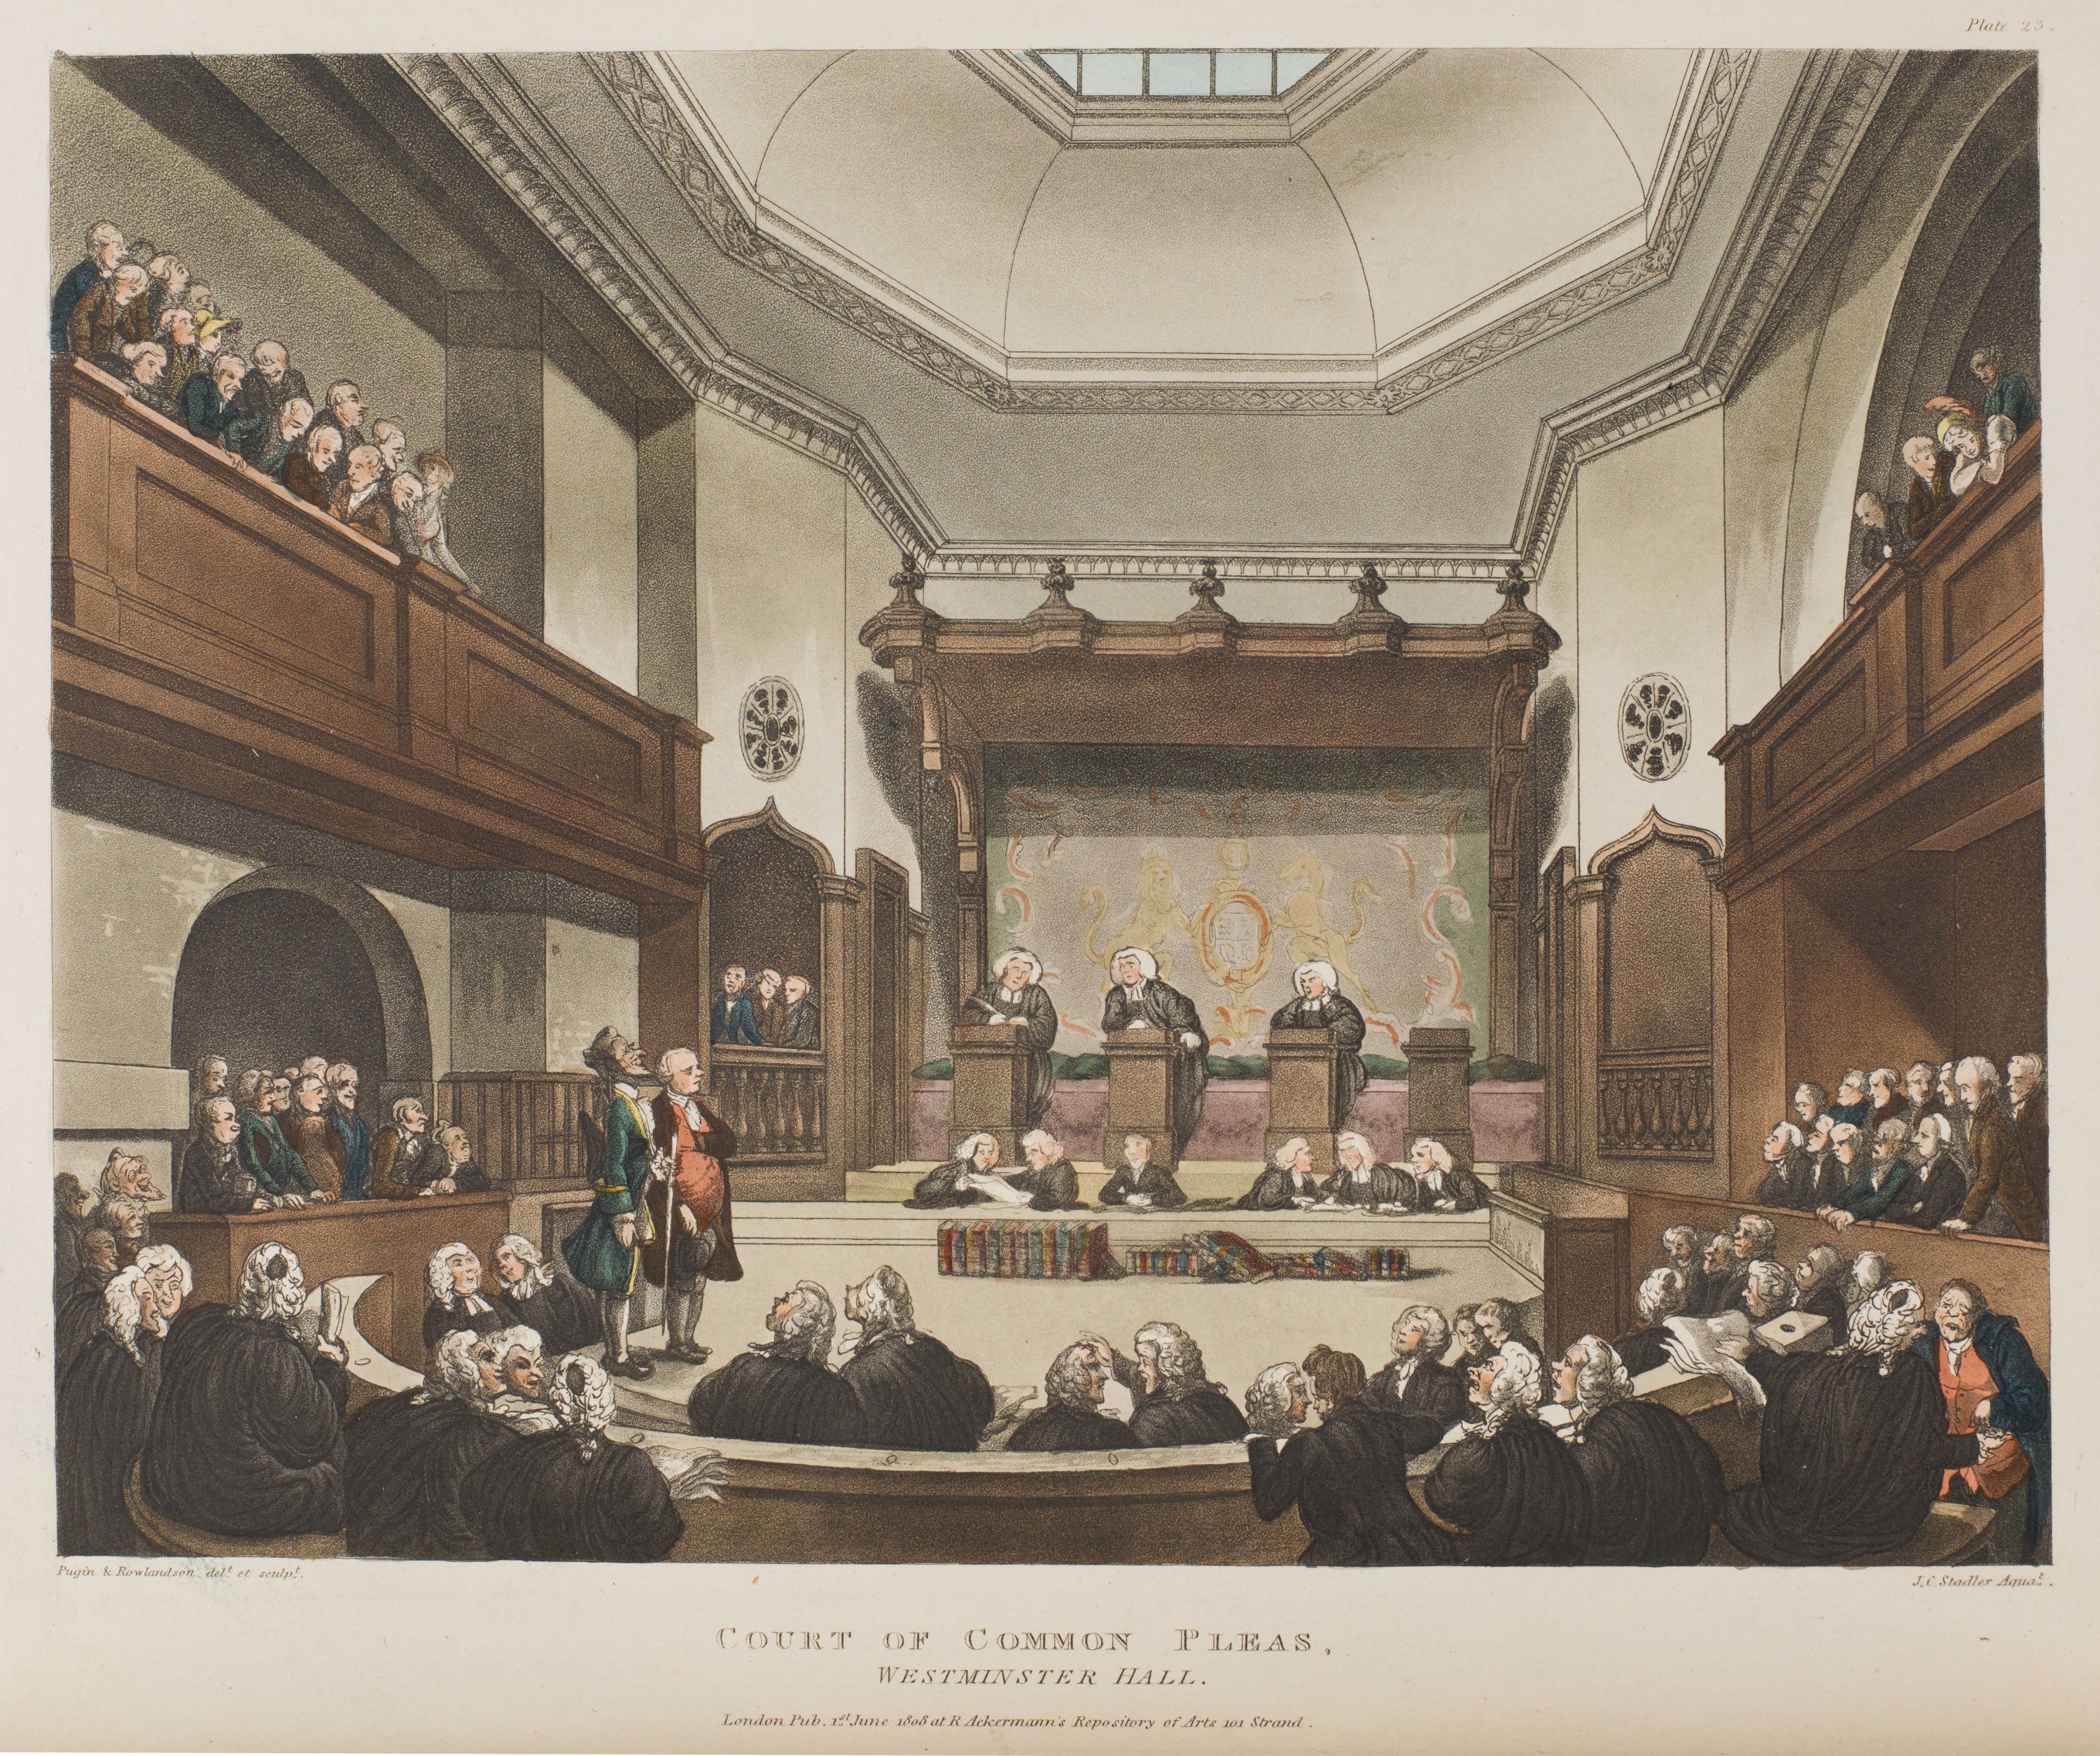 023 - Court of Common Pleas, Westminster Hall